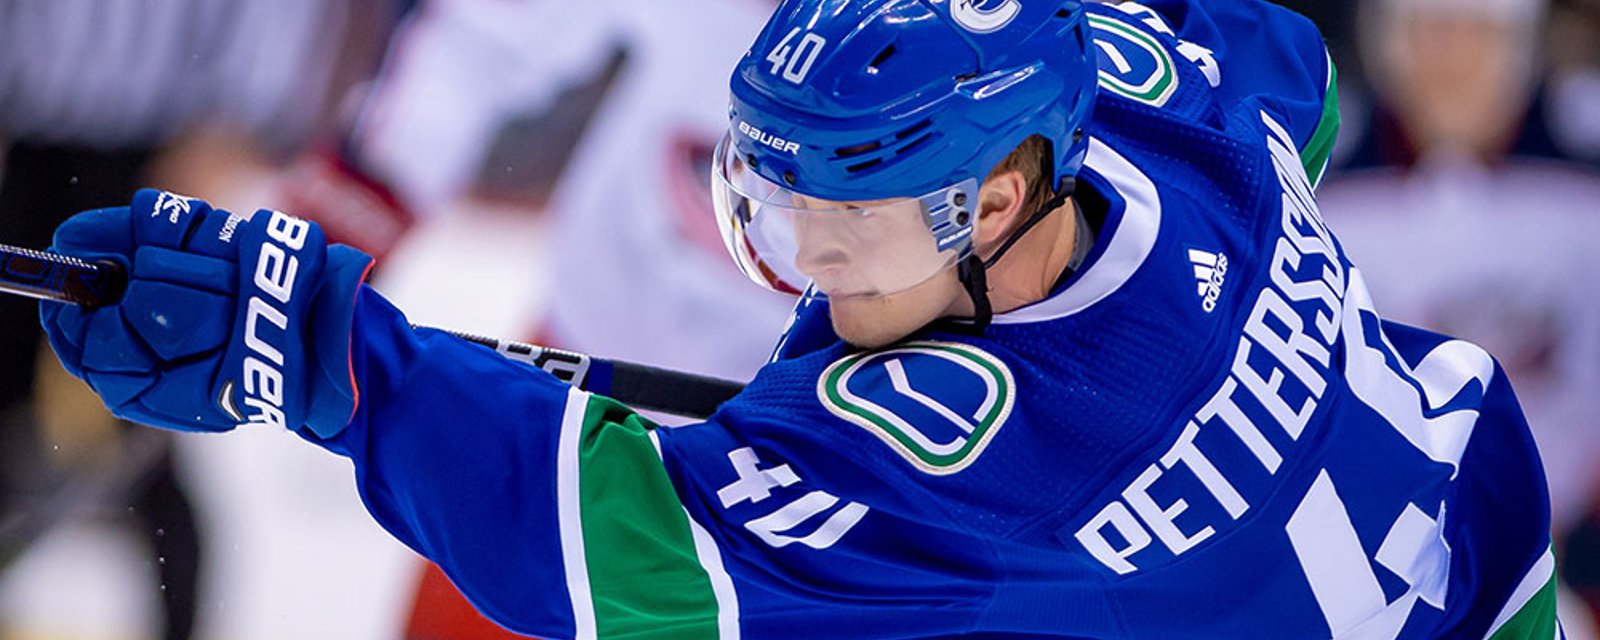 Pettersson spends summer gaining muscle and is “pumped” for upcoming season